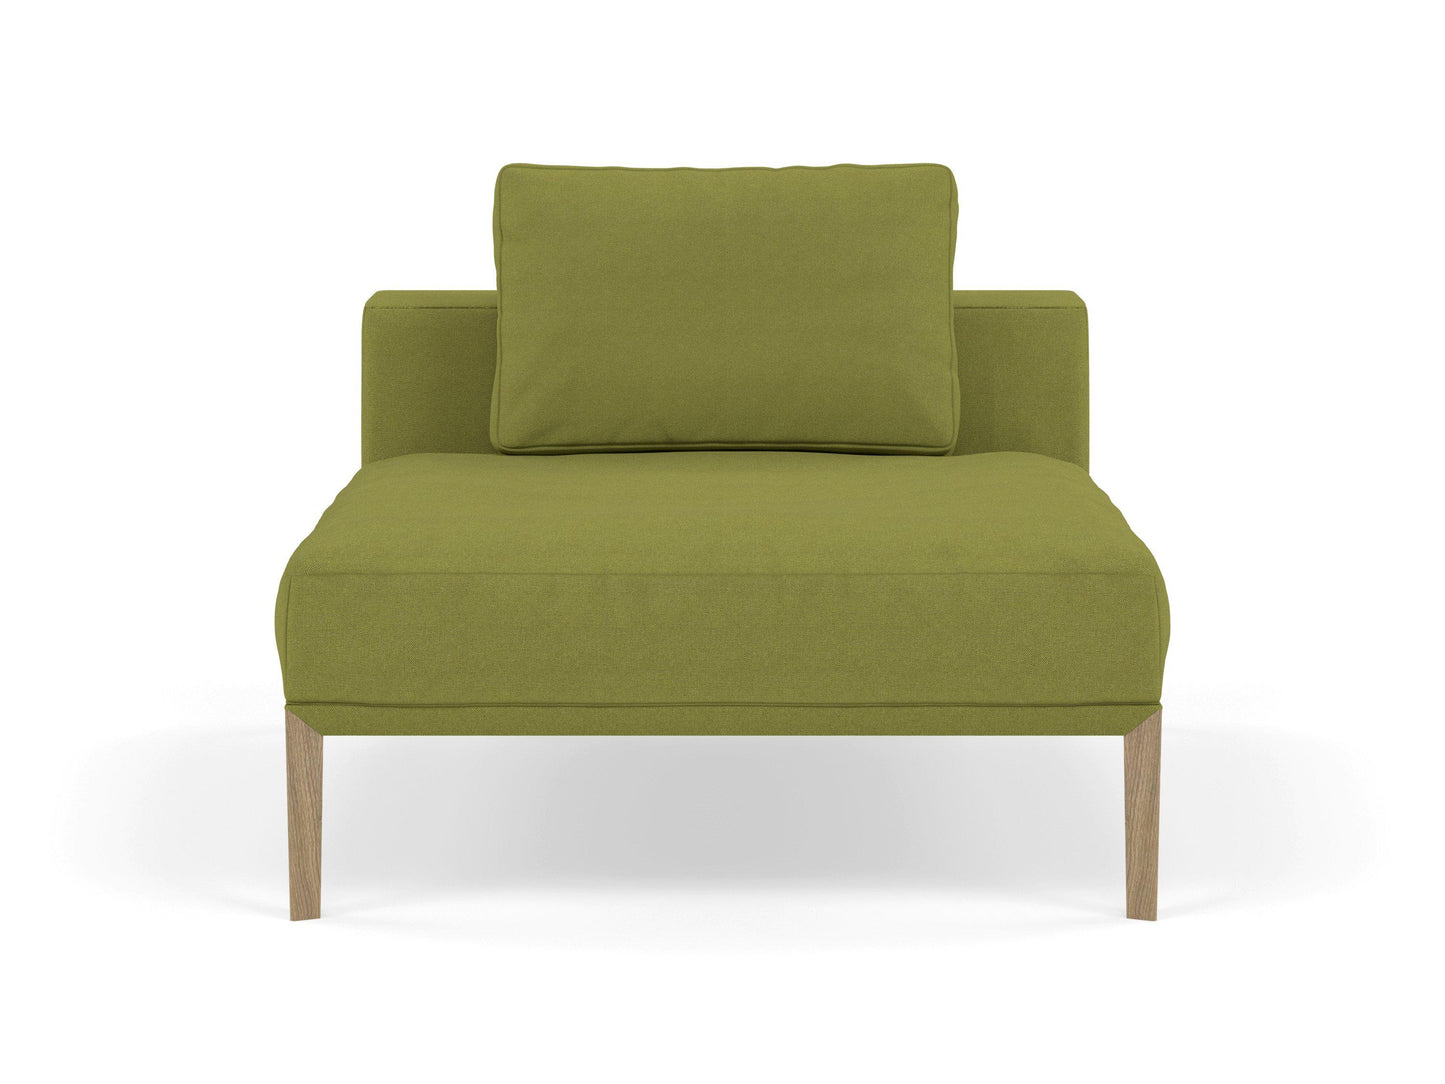 Modern Armchair 1 Seater Sofa without armrests in Lime Green Fabric-Natural Oak-Distinct Designs (London) Ltd